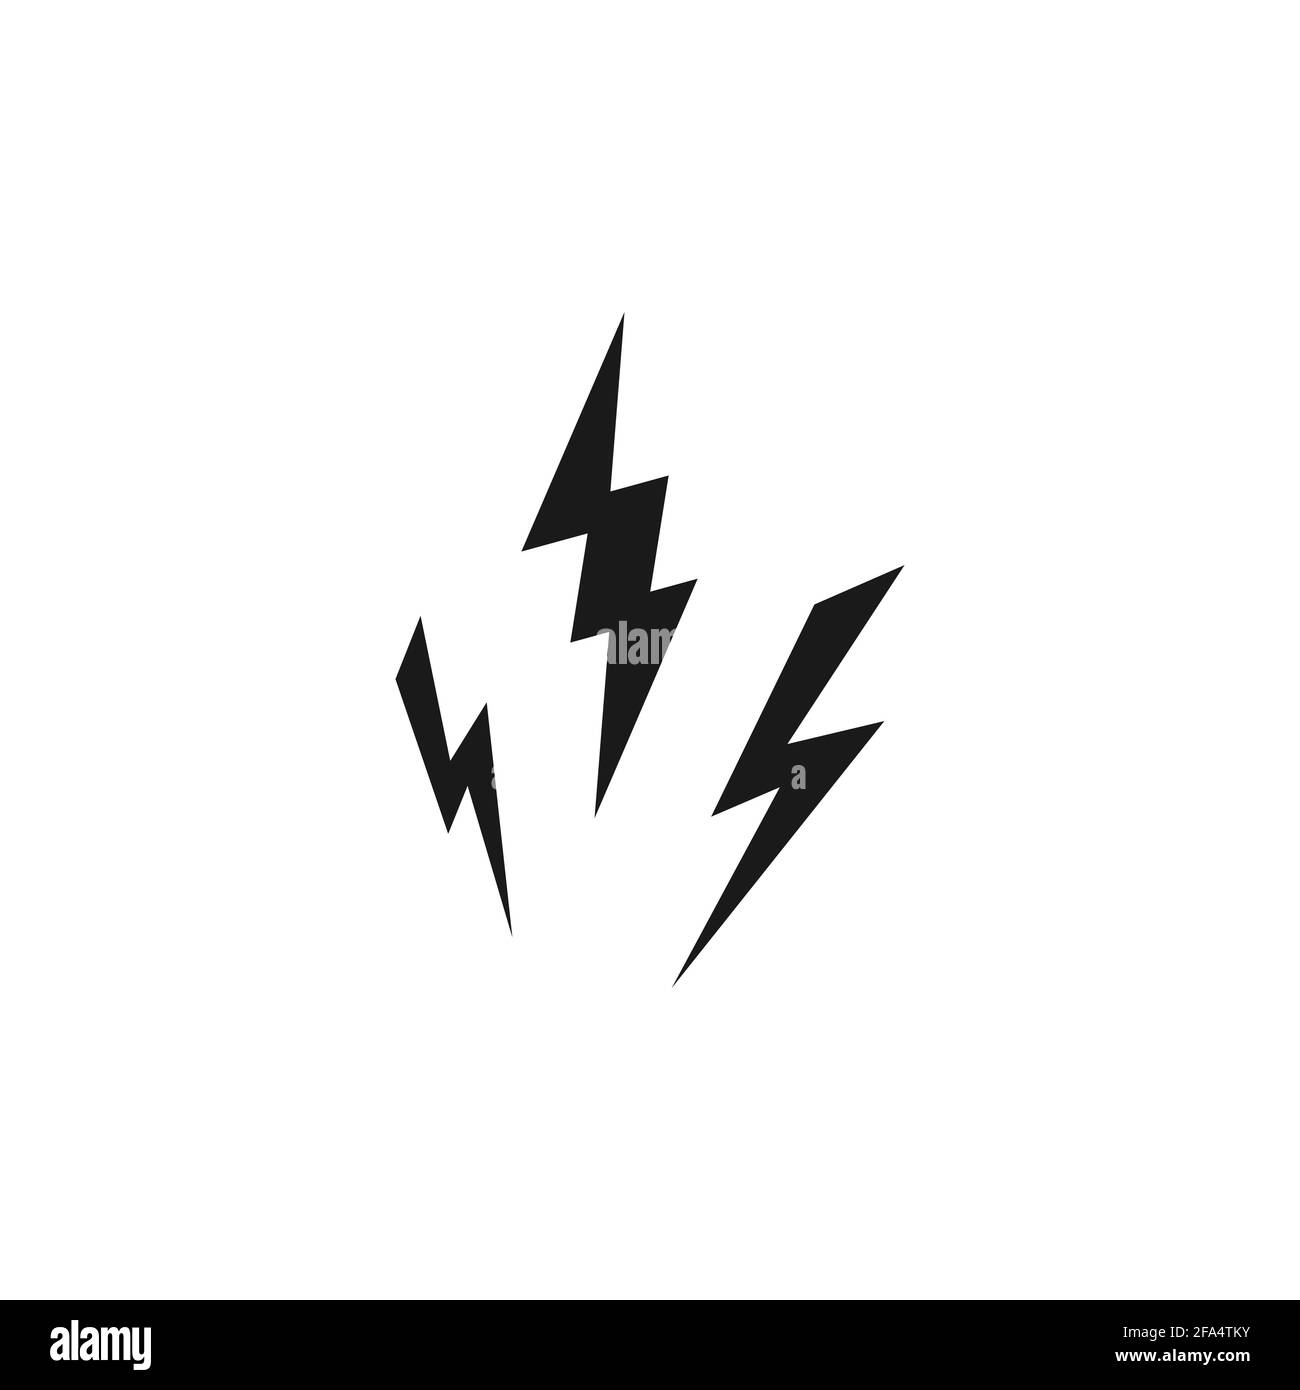 Three black lightning bolts. storm or thunder icon. Lightning strike sign isolated on white. High electricity voltage or explosion symbol. Vetor illus Stock Vector